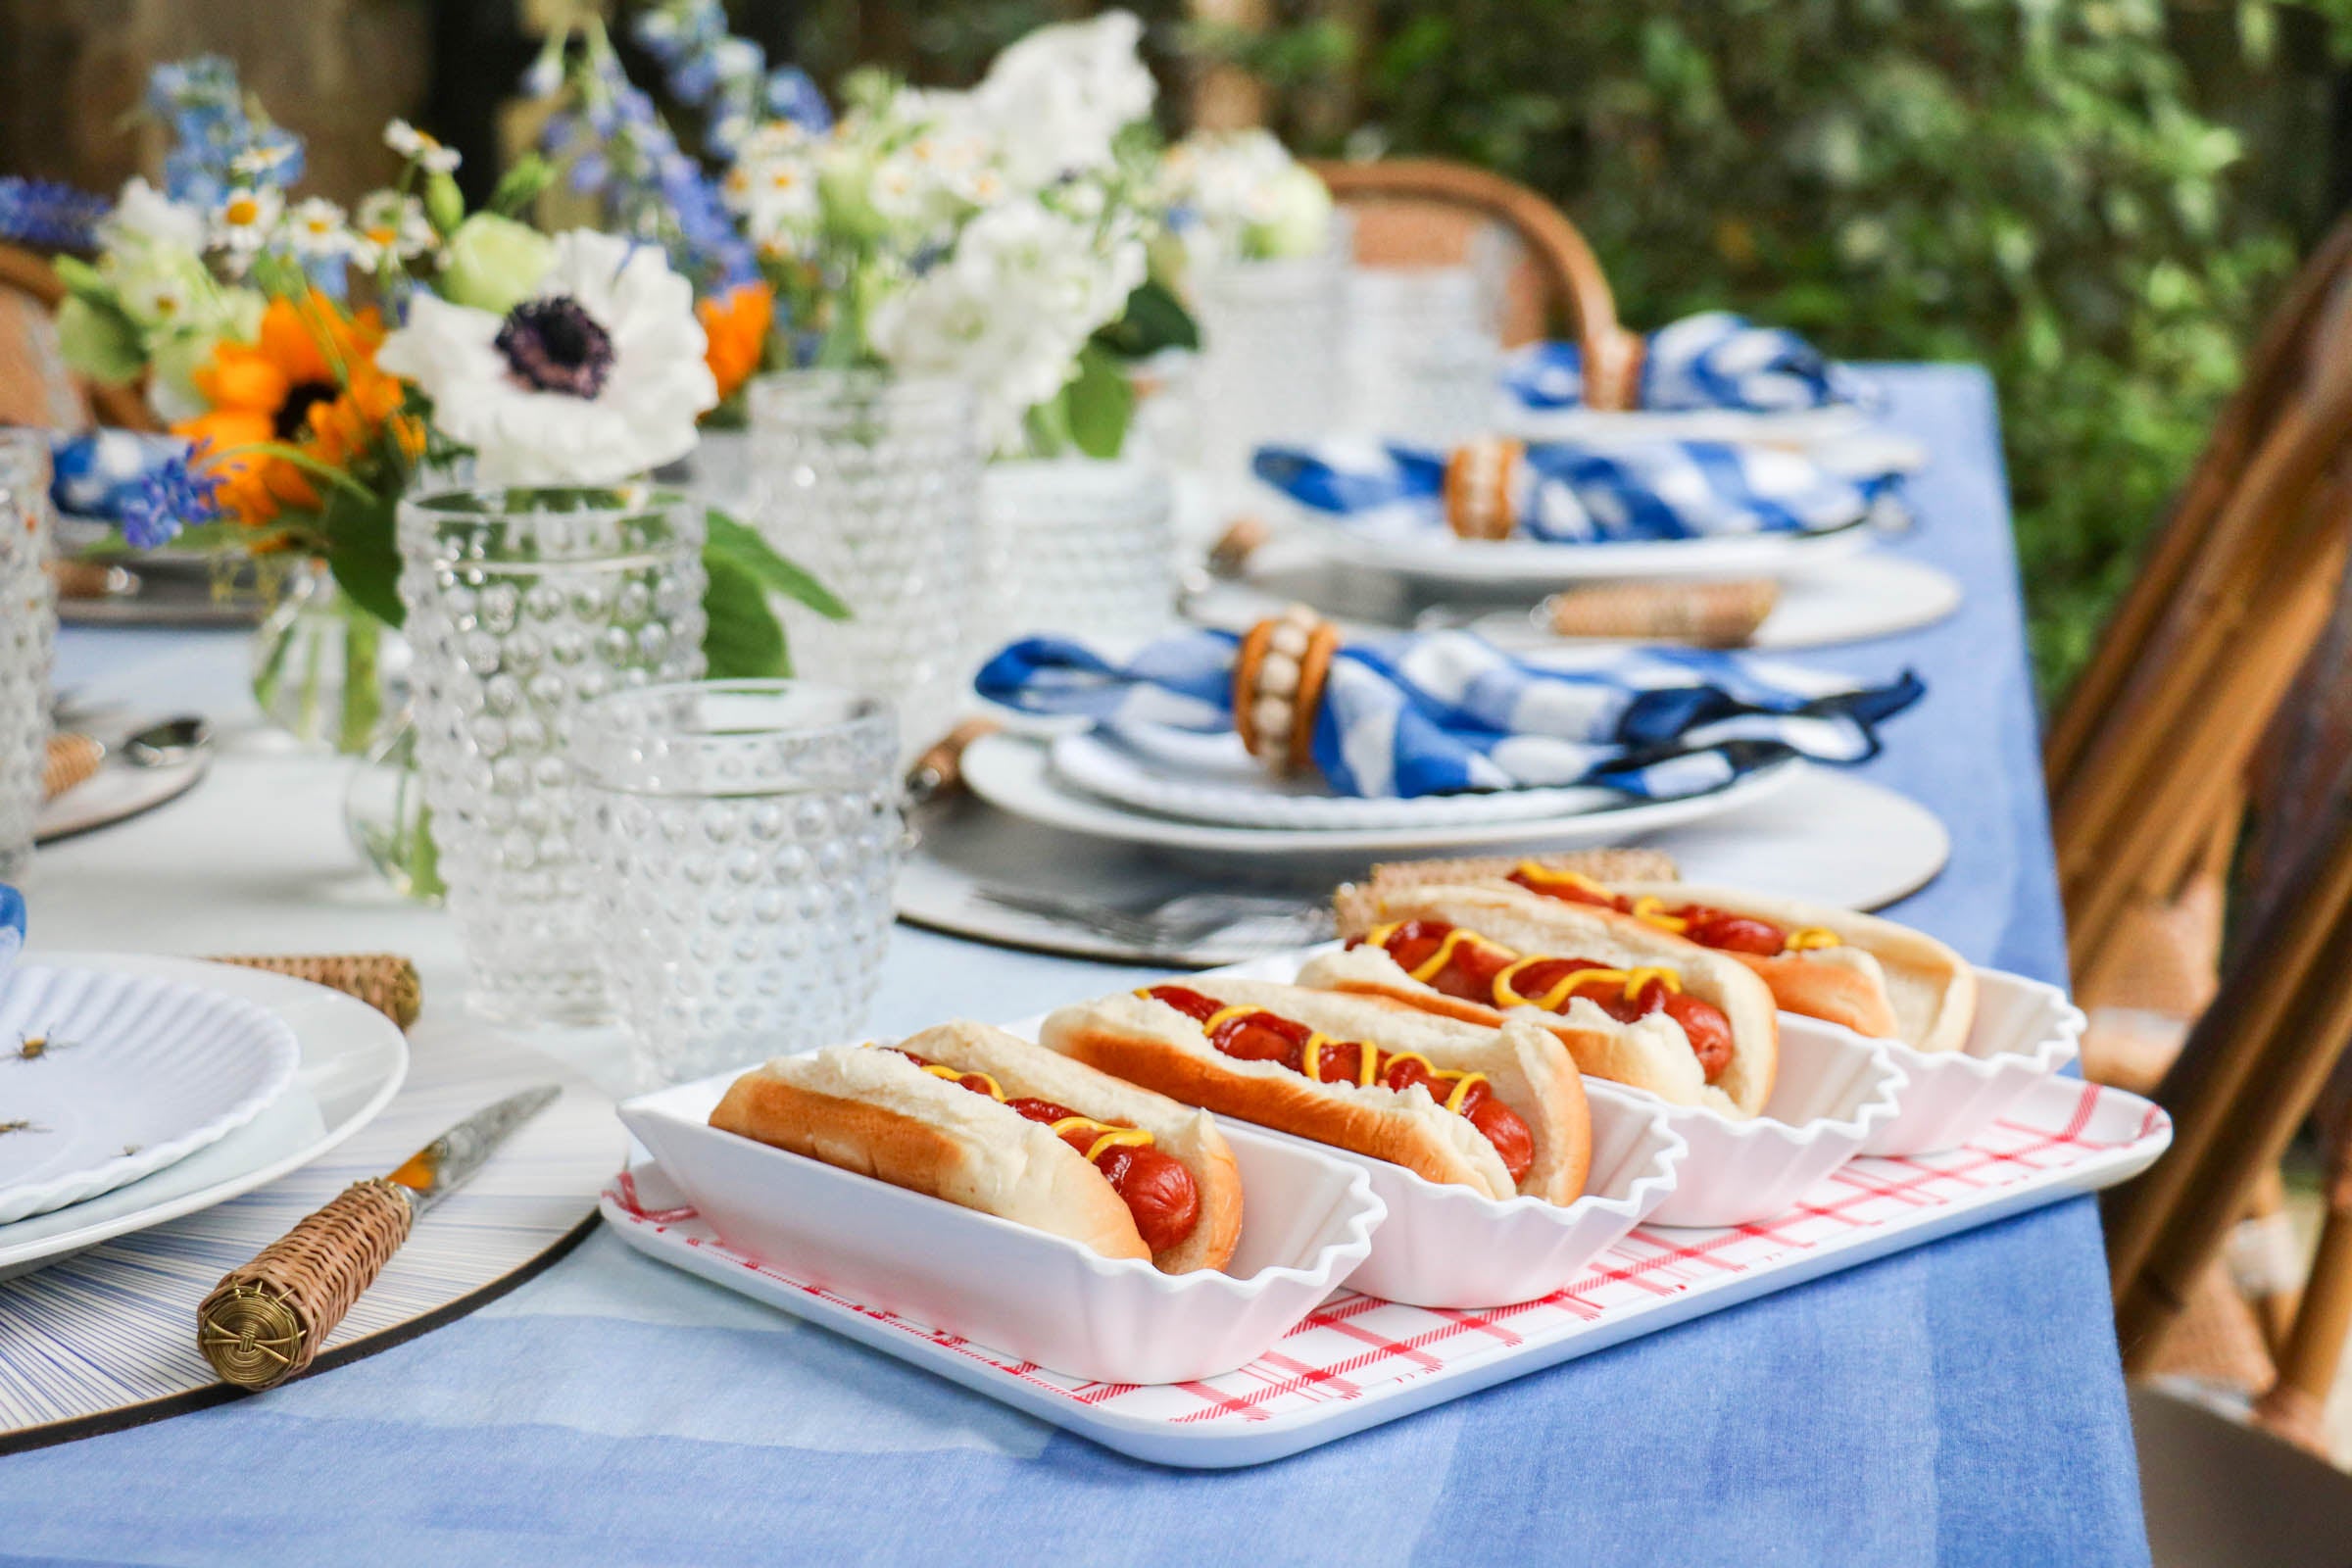 Summer Style Recipe: What to Wear to a Backyard BBQ